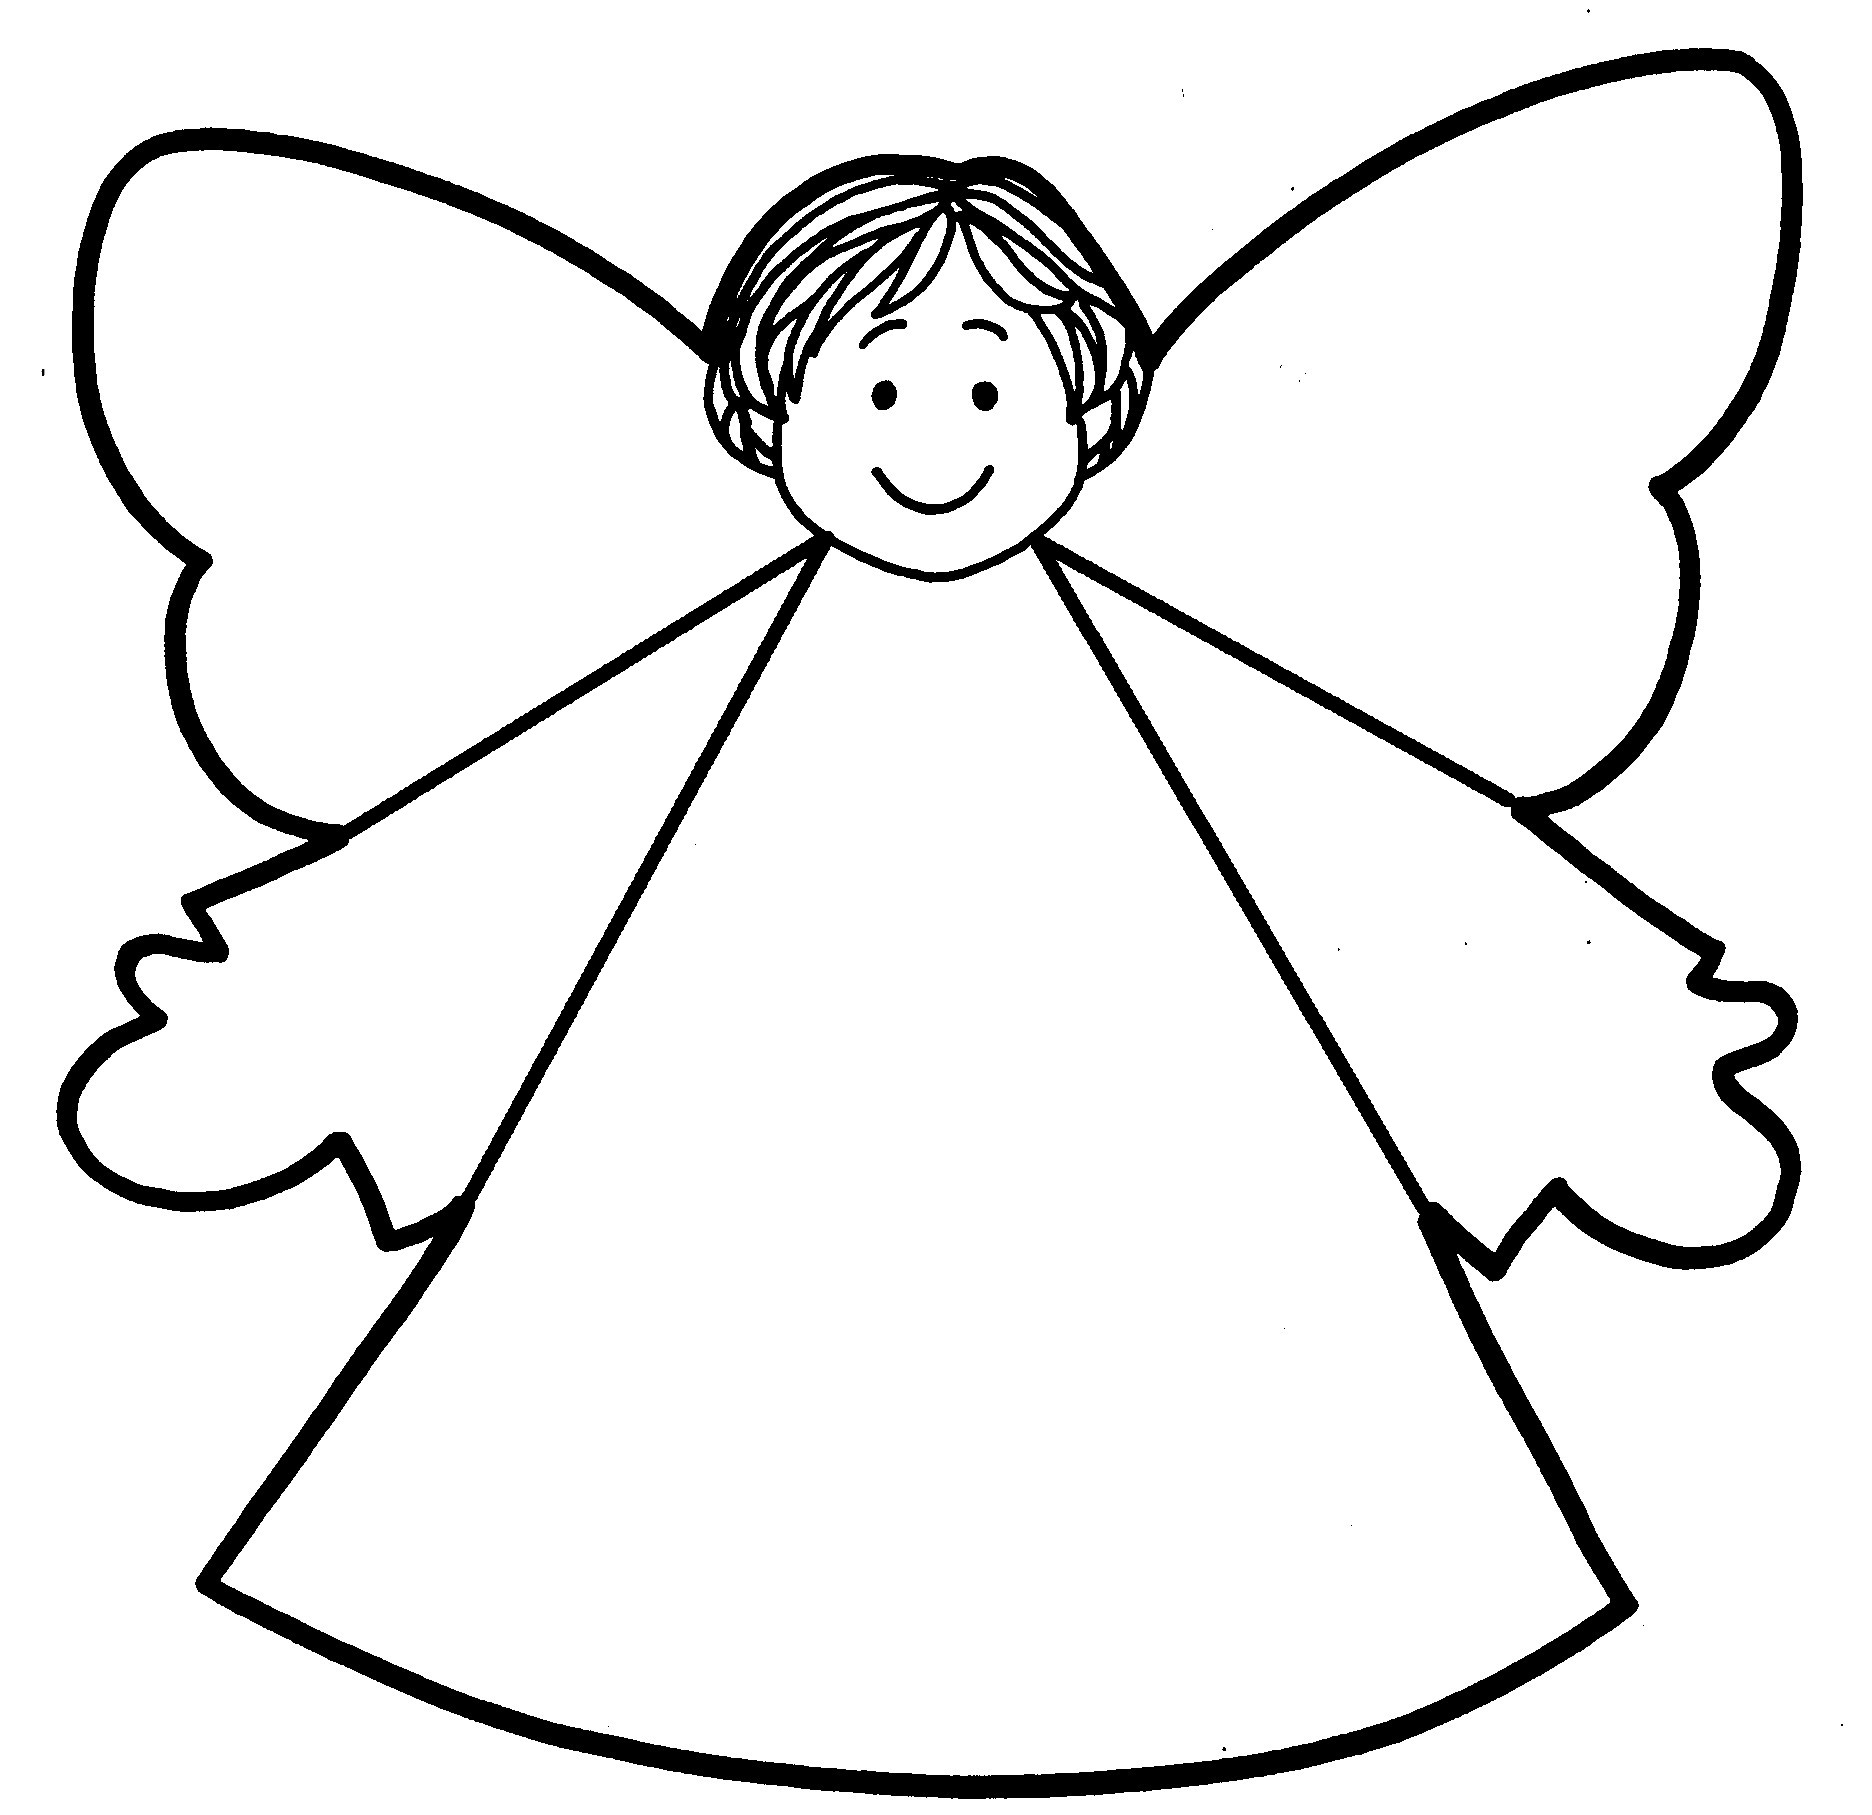 cut-out-angel-template-printable-free